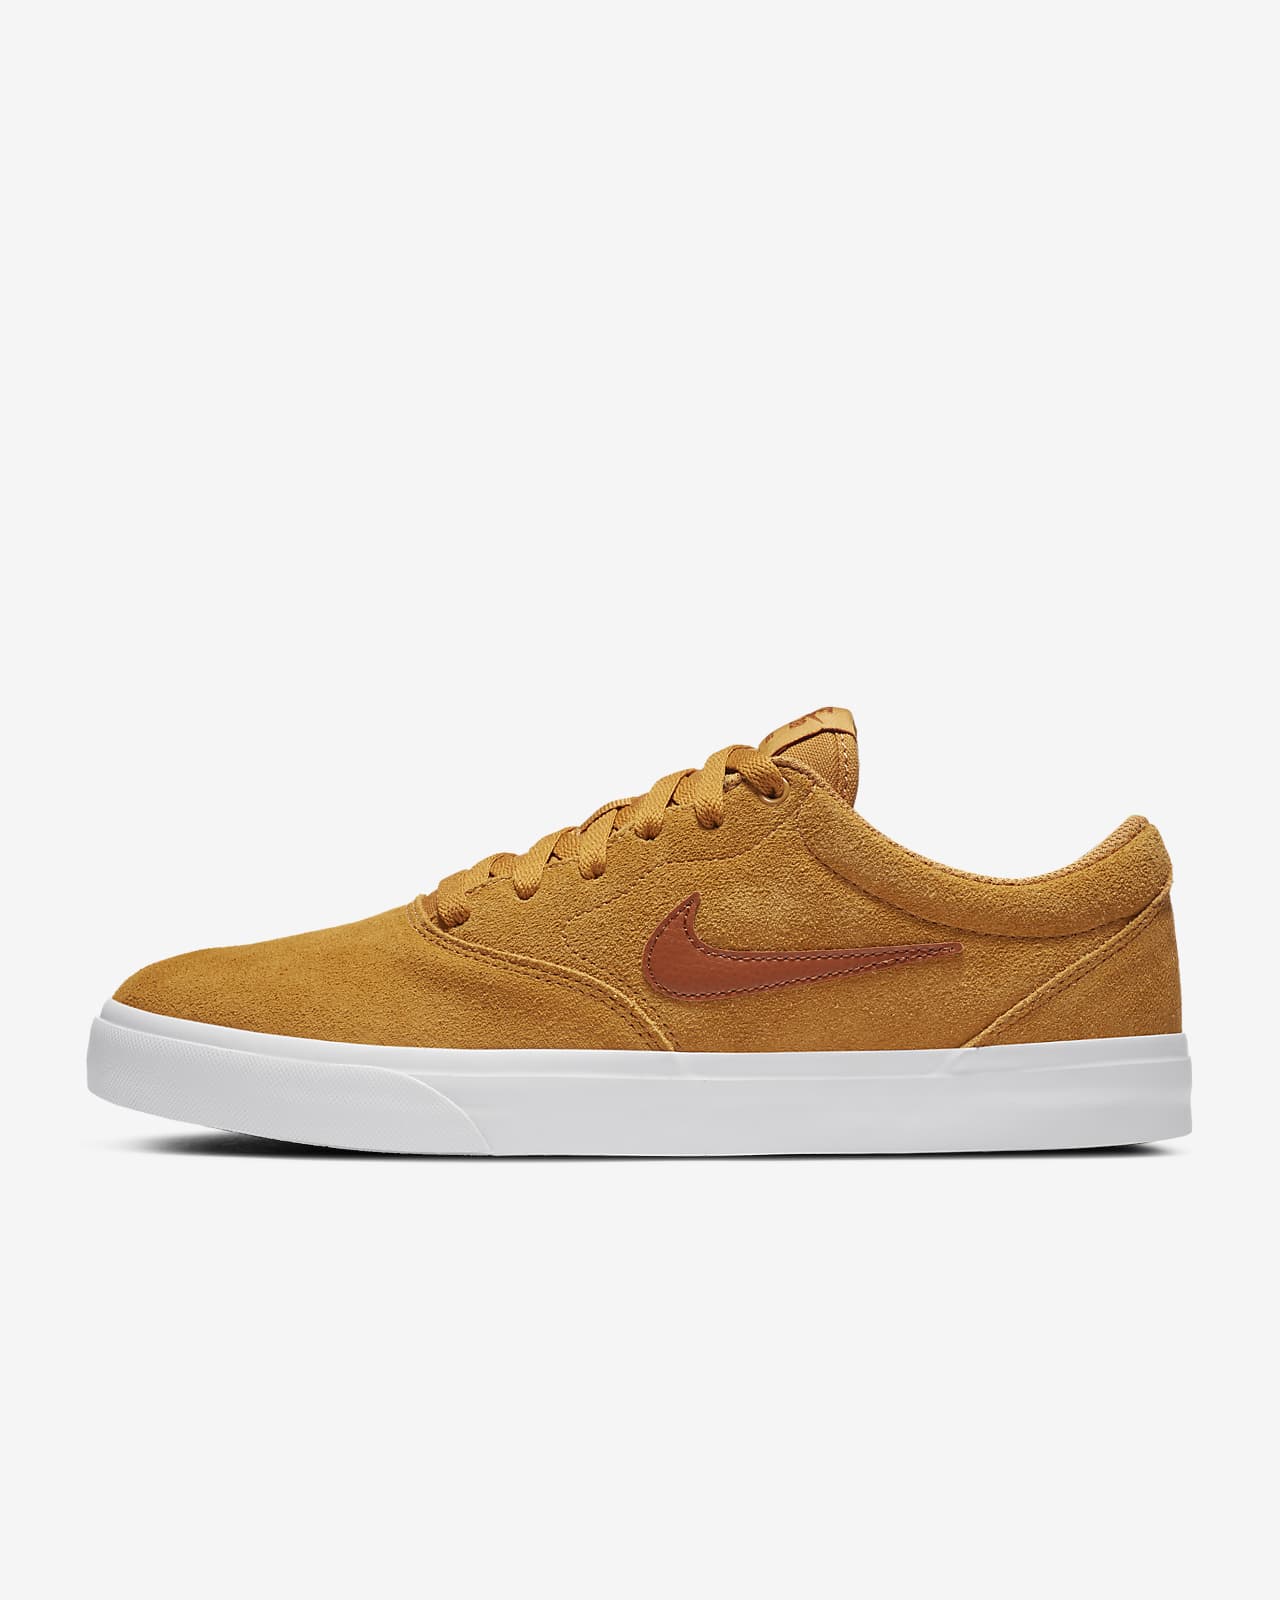 suede nike shoes